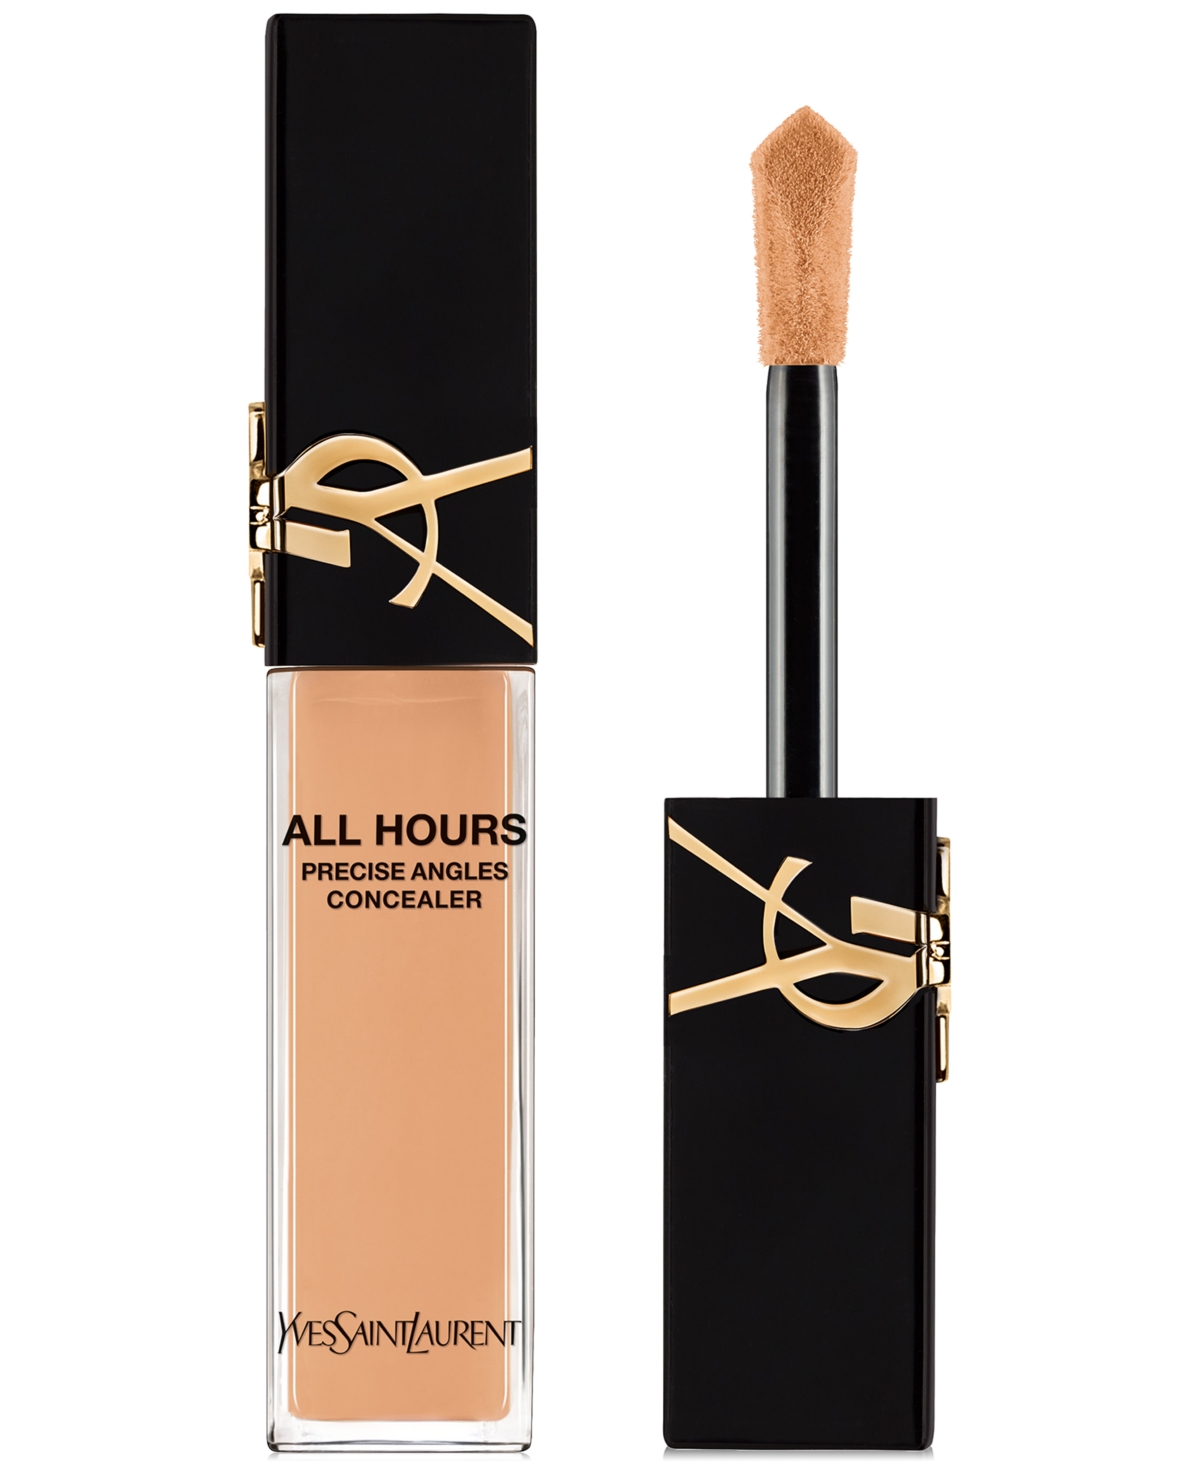 Saint Laurent All Hours Precise Angles Full-coverage Concealer In Light Shade With Cool Undertones